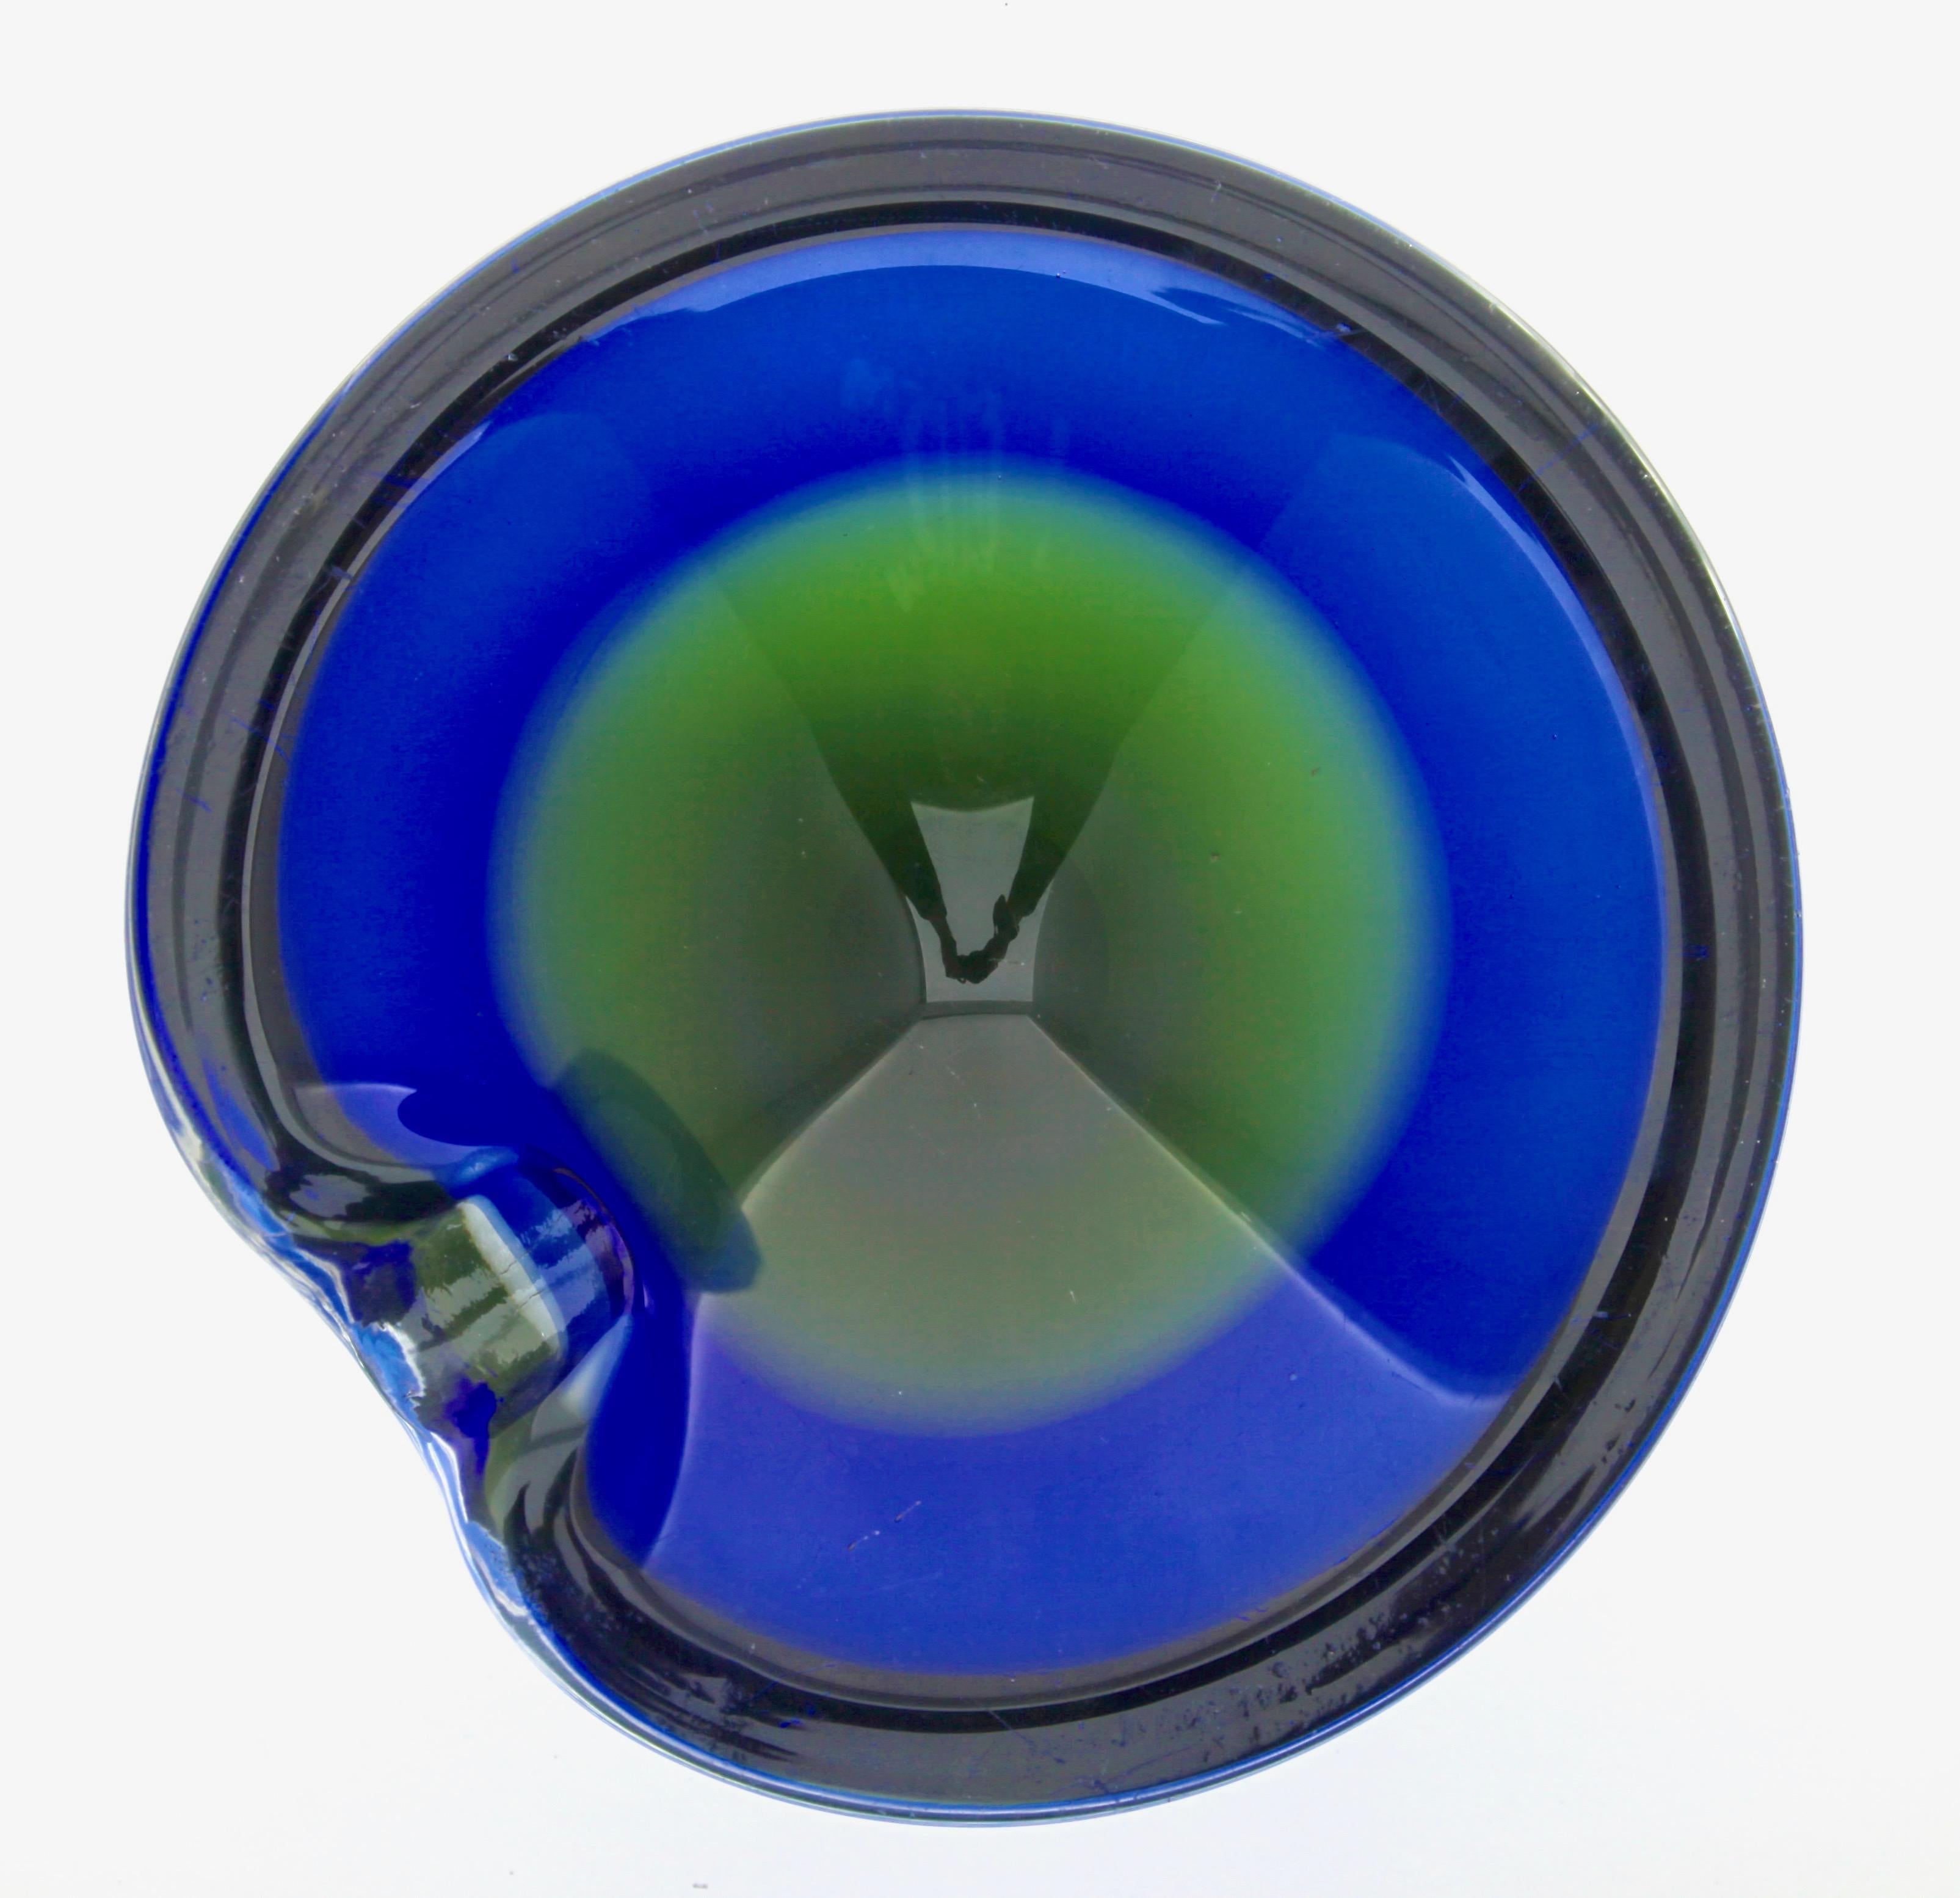 The bowl has sommerso colour within the glass of blue and Green. 
The blue rim sits on the Green coloured sommerso glass.
Fantastic freeform sculptural art glass geode bowl probably designed by Gino Cenedese.